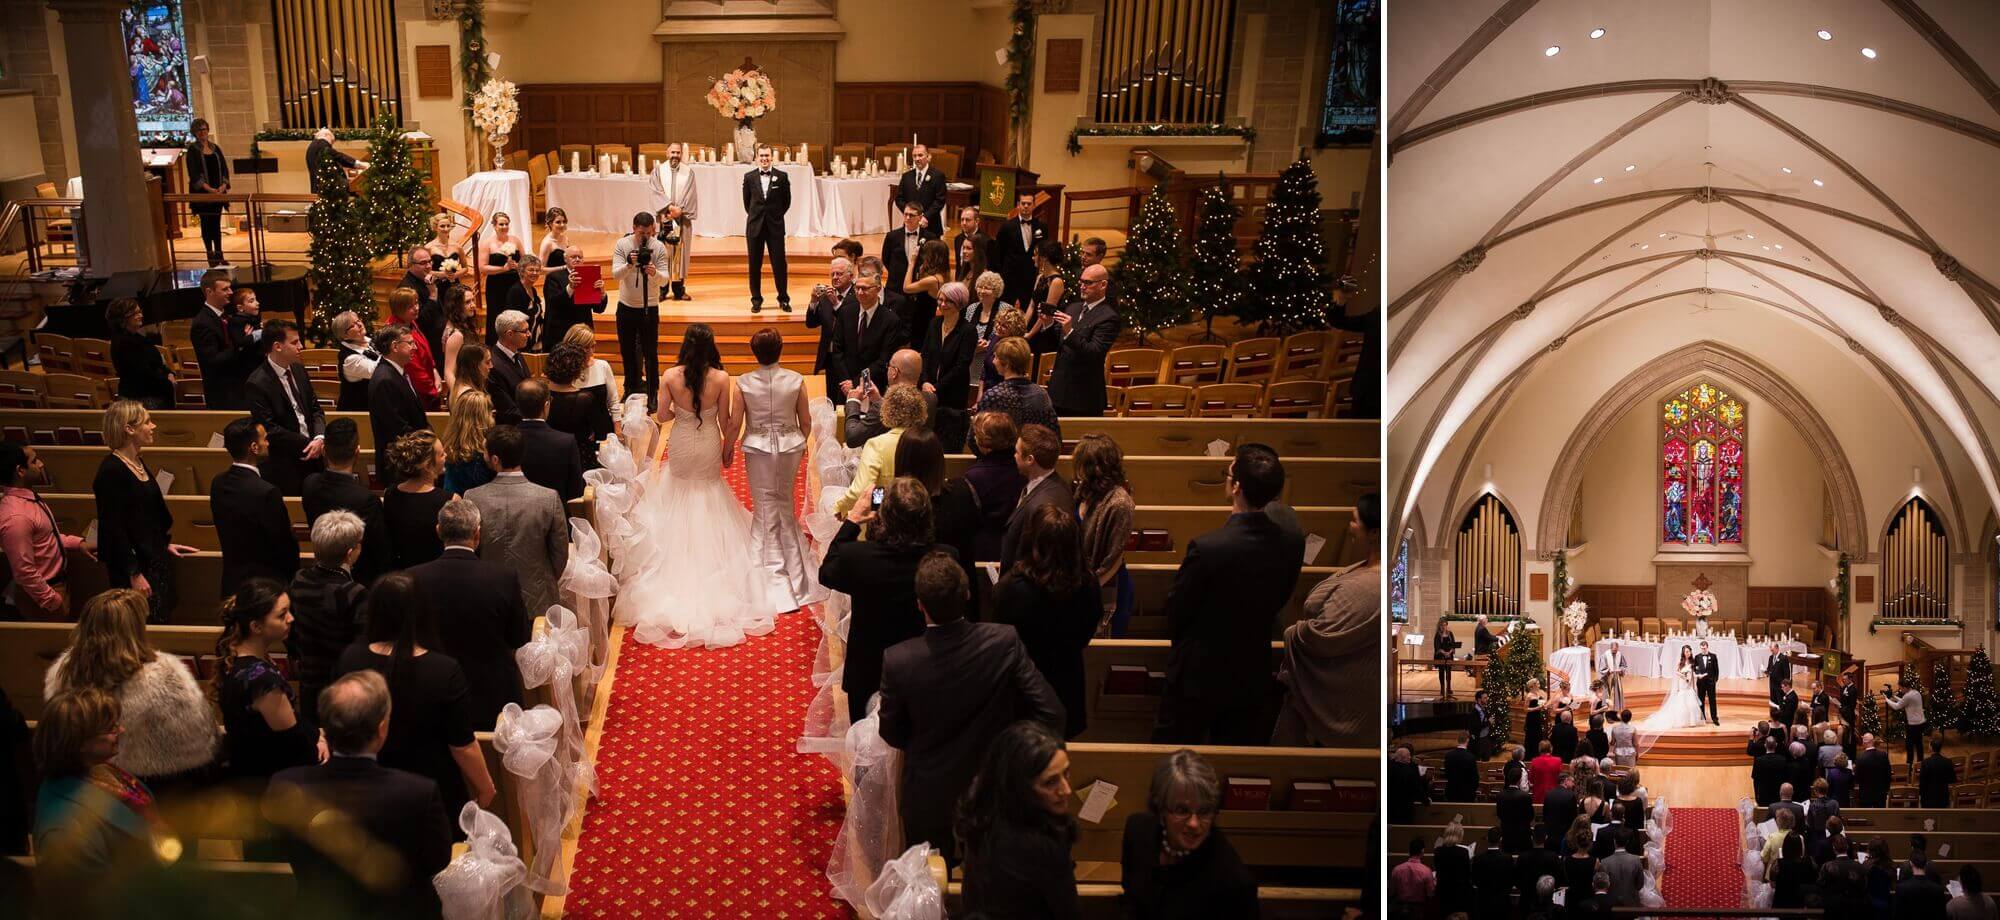 Overview of the Rosedale United Church in Toronto, as the bride walks down the aisle to her groom